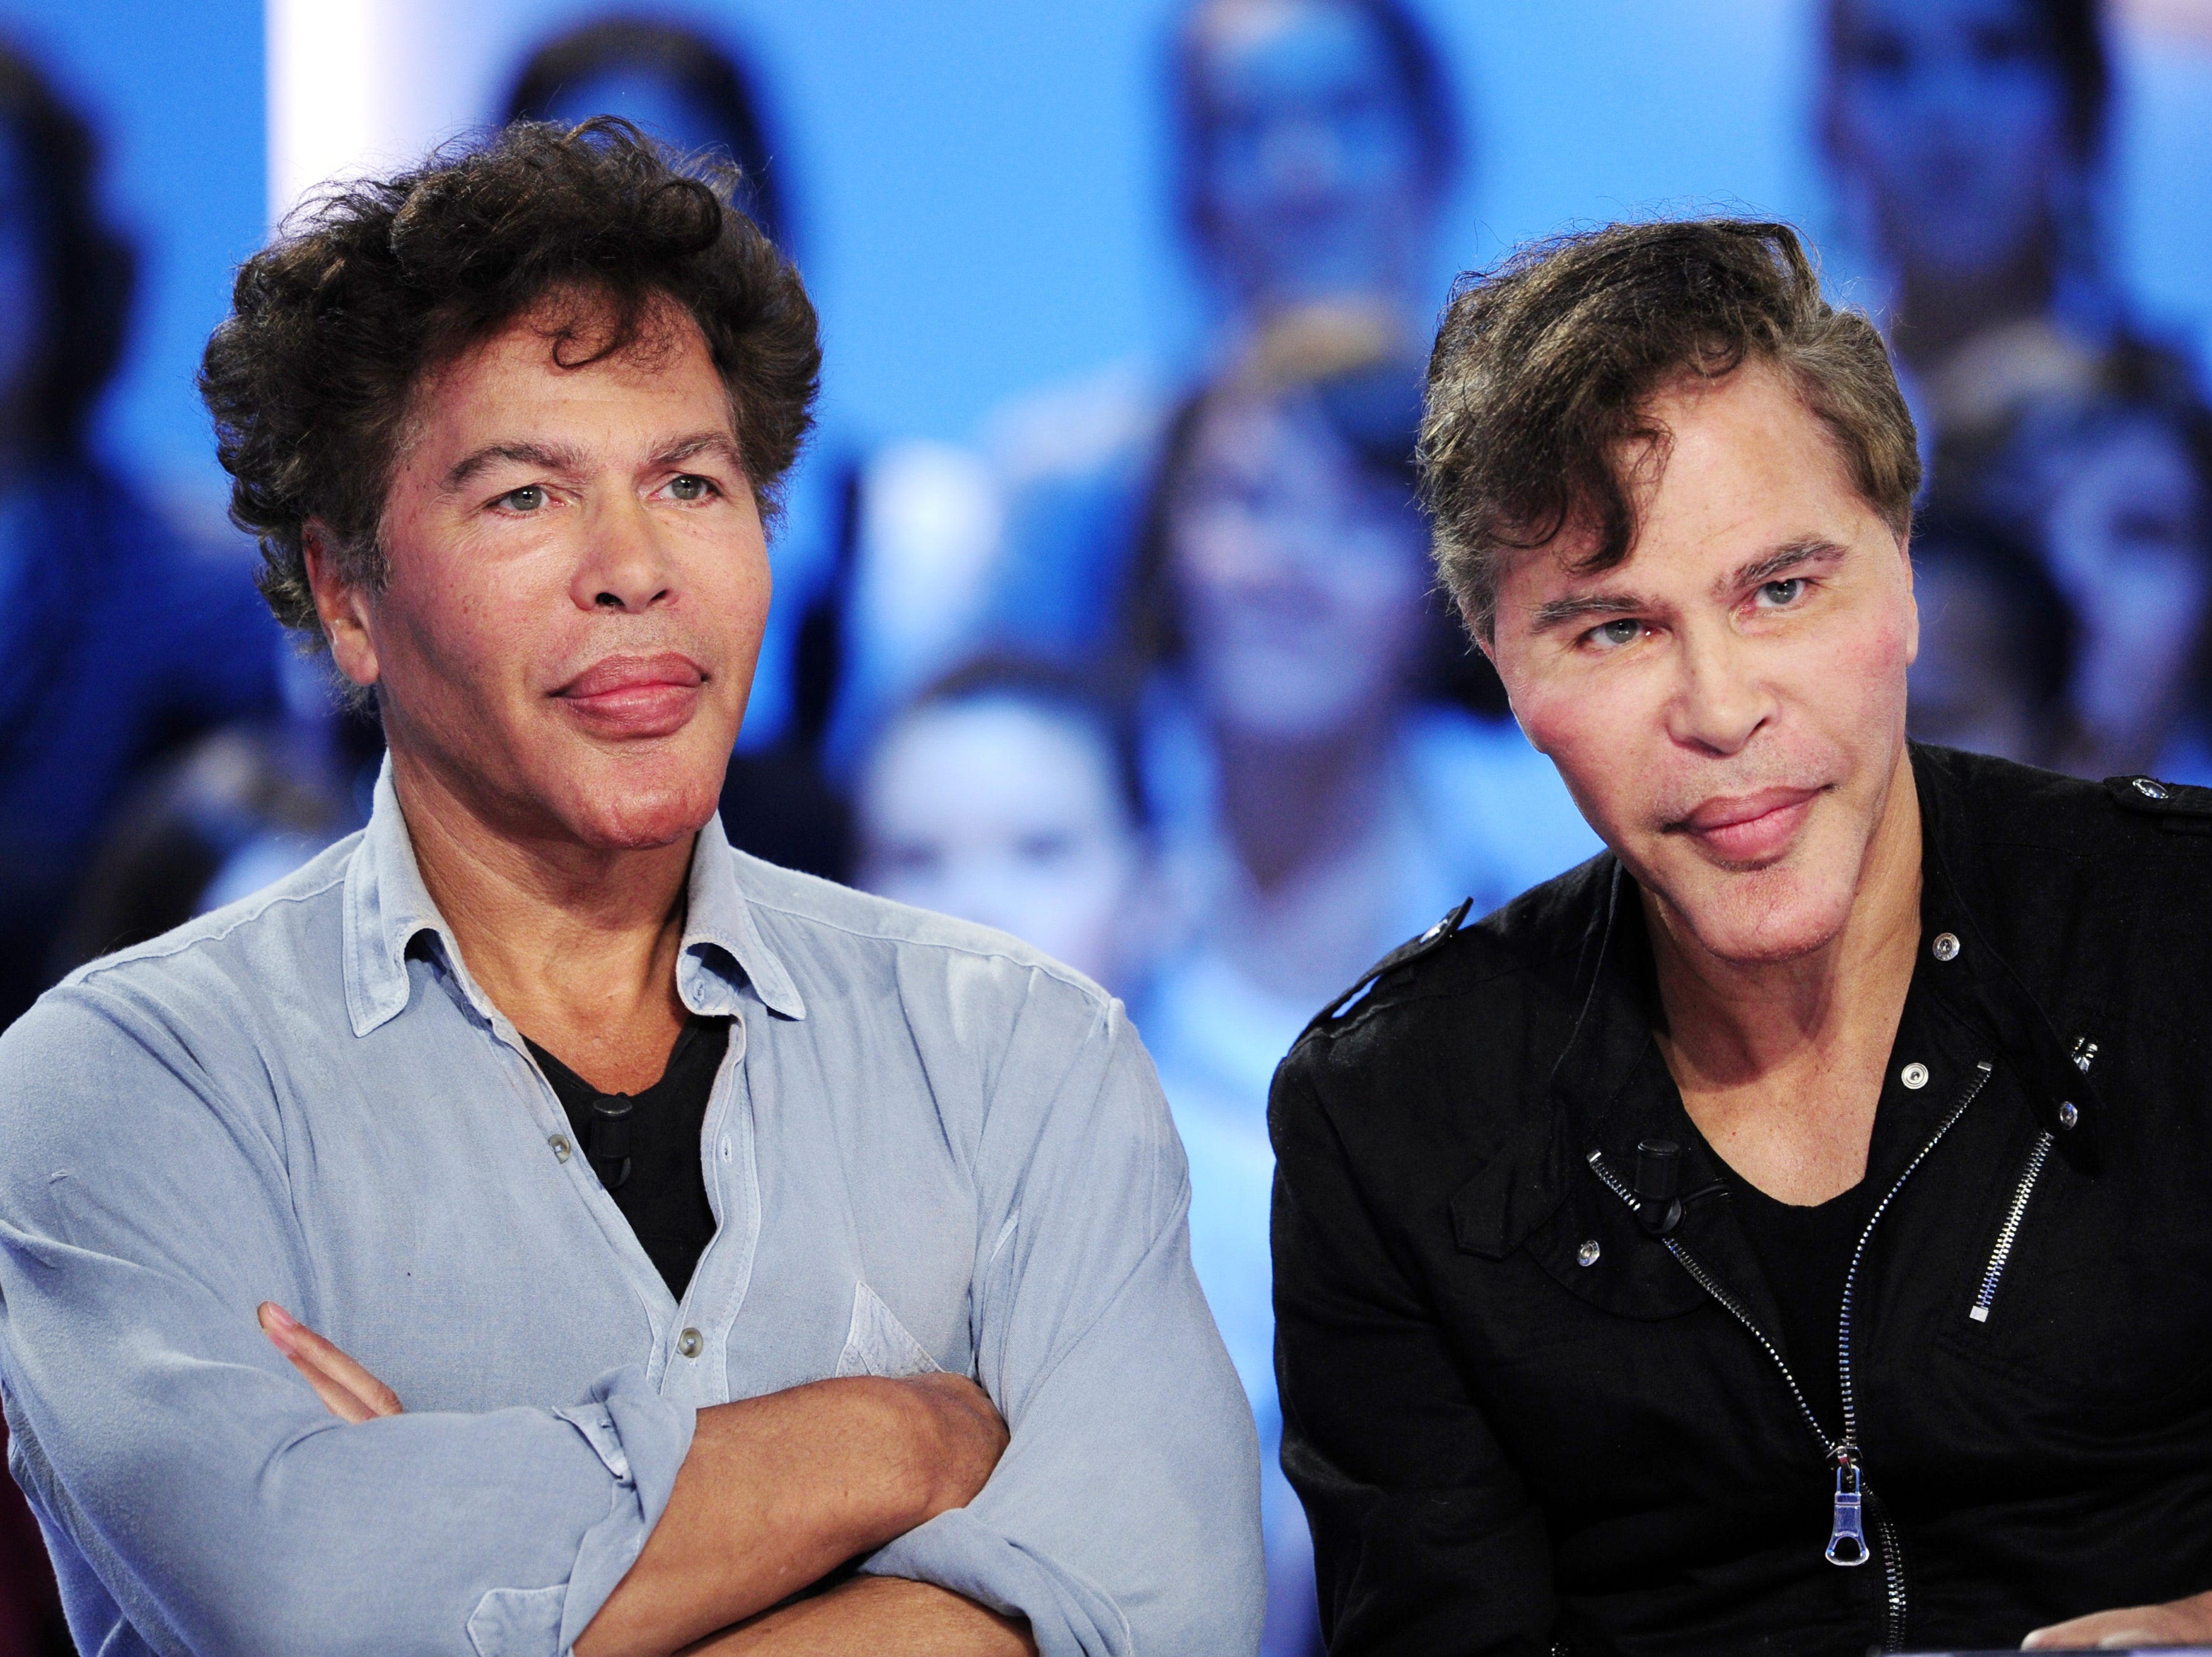 Igor and Grichka Bogdanoff on French television on 20 October 2010 in Paris, France